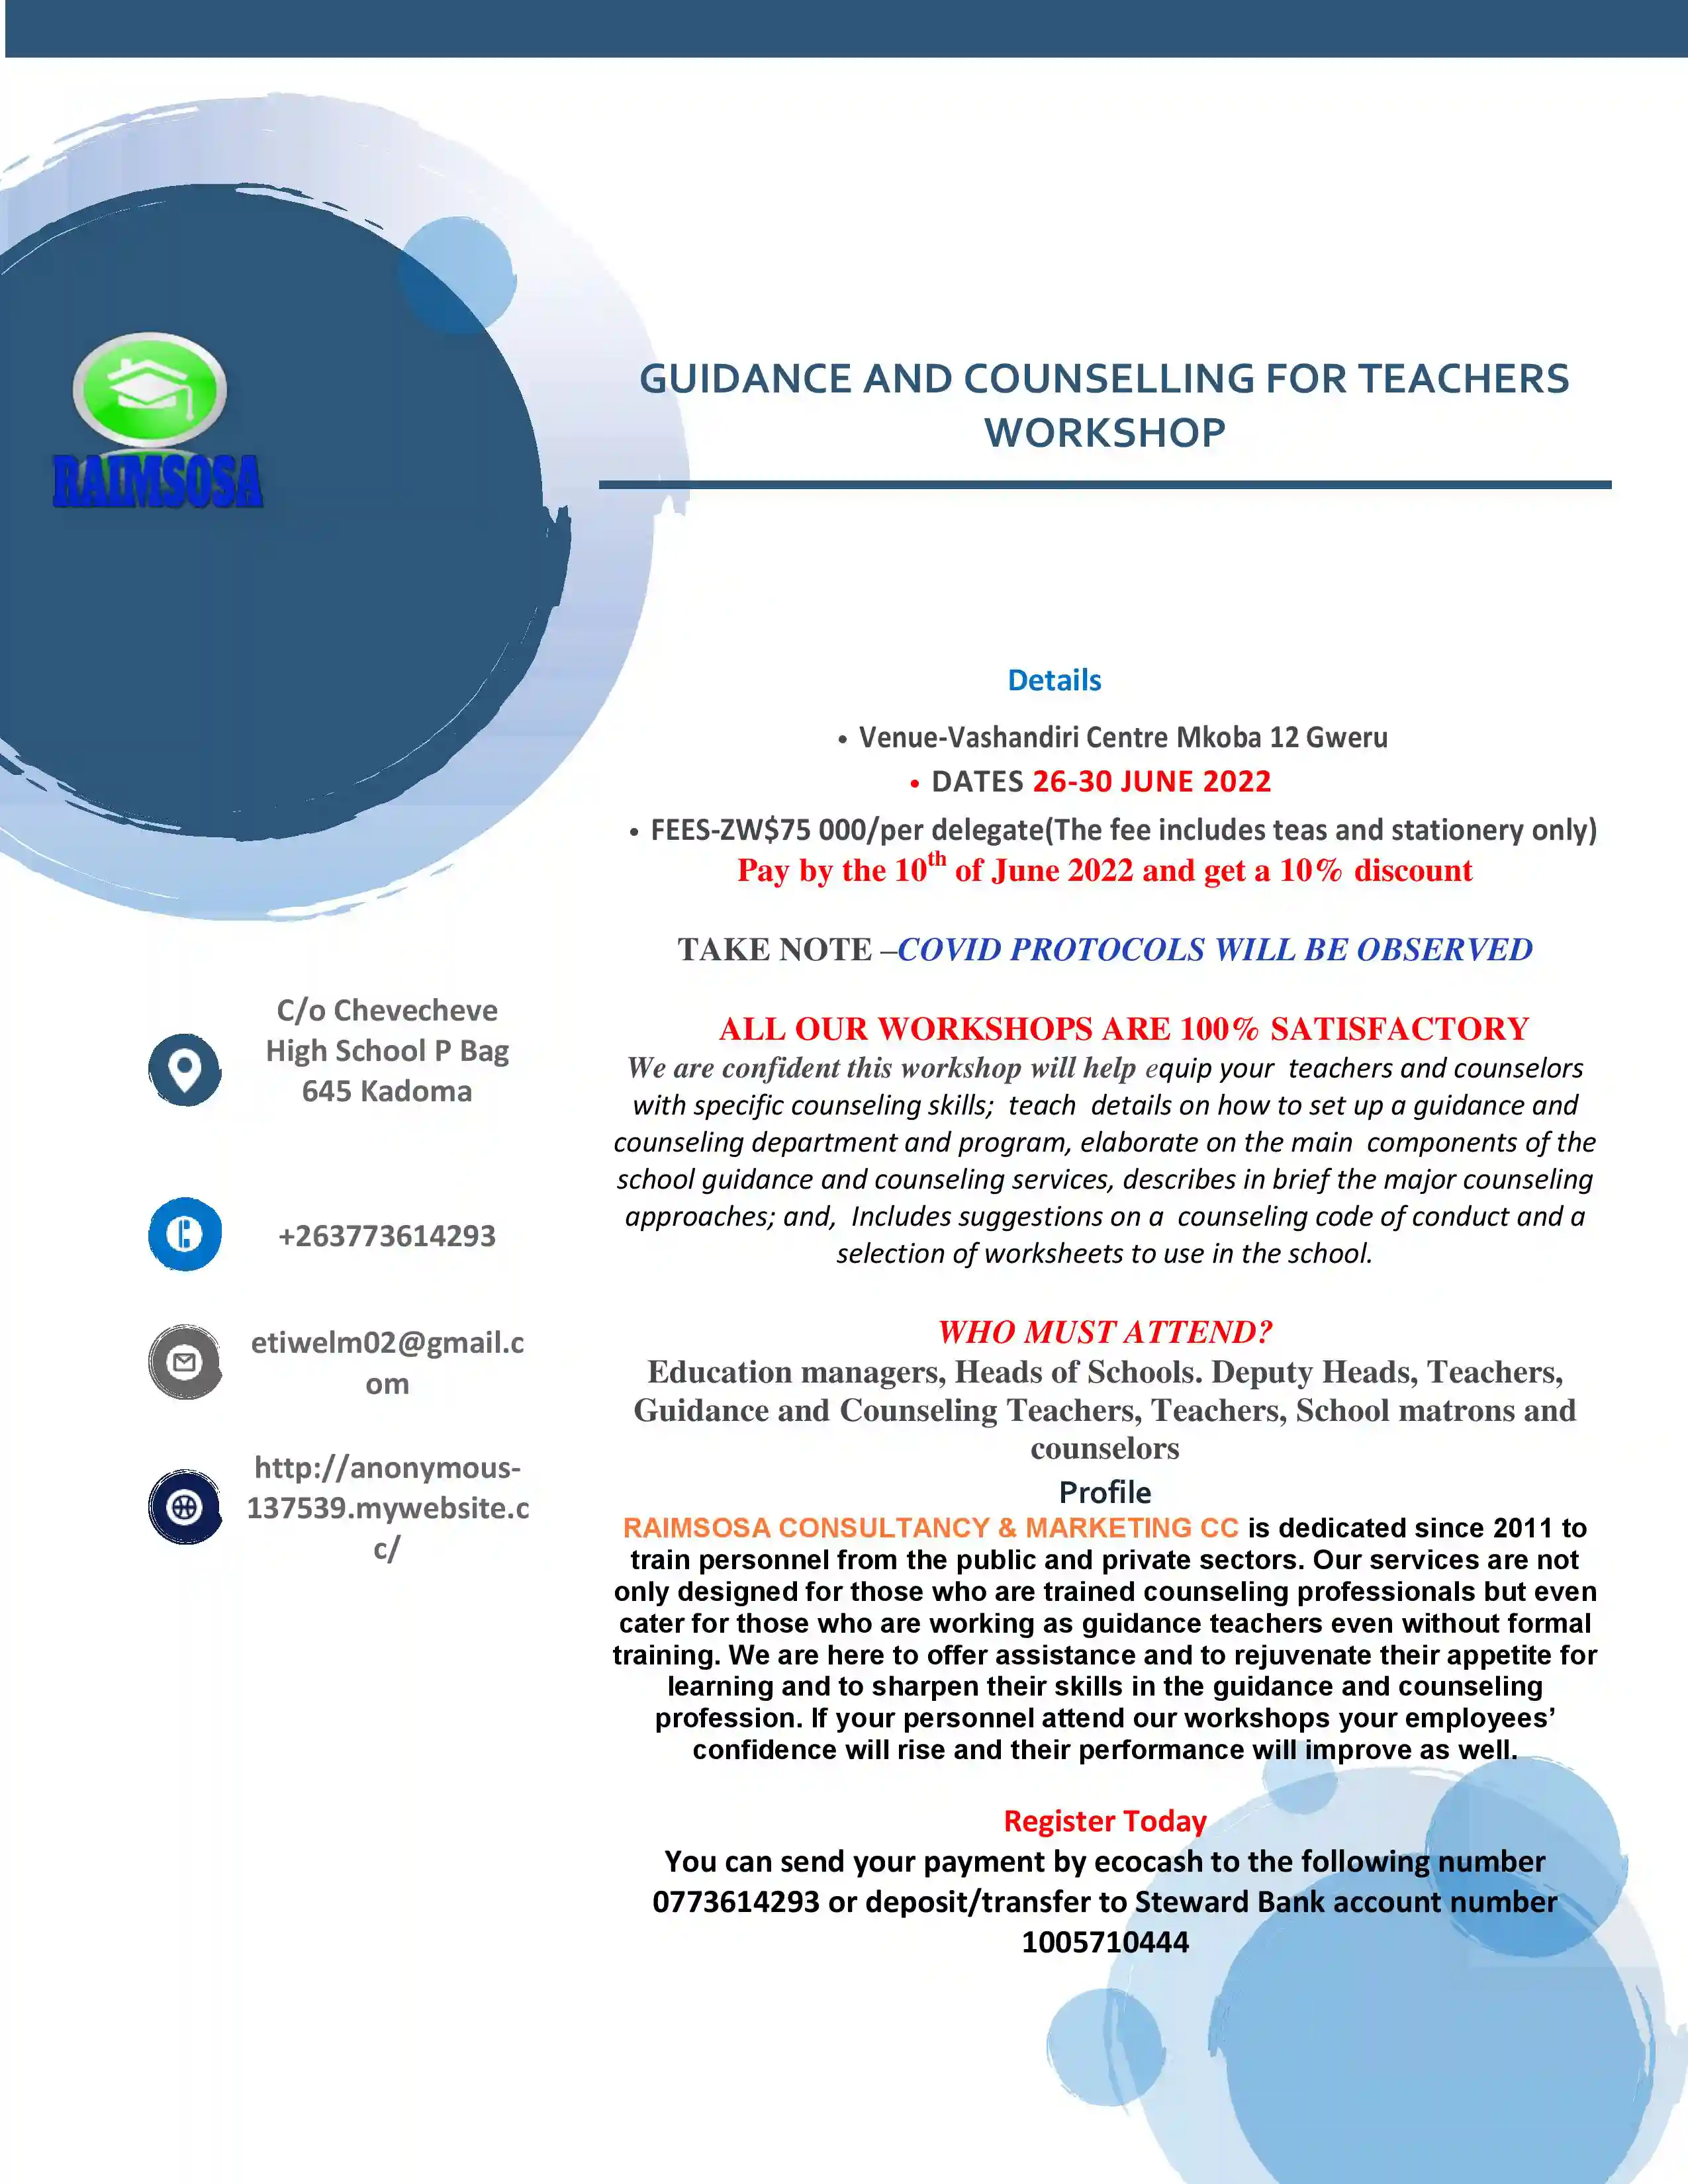 GUIDANCE AND COUNSELLING FOR TEACHERS WORKSHOP